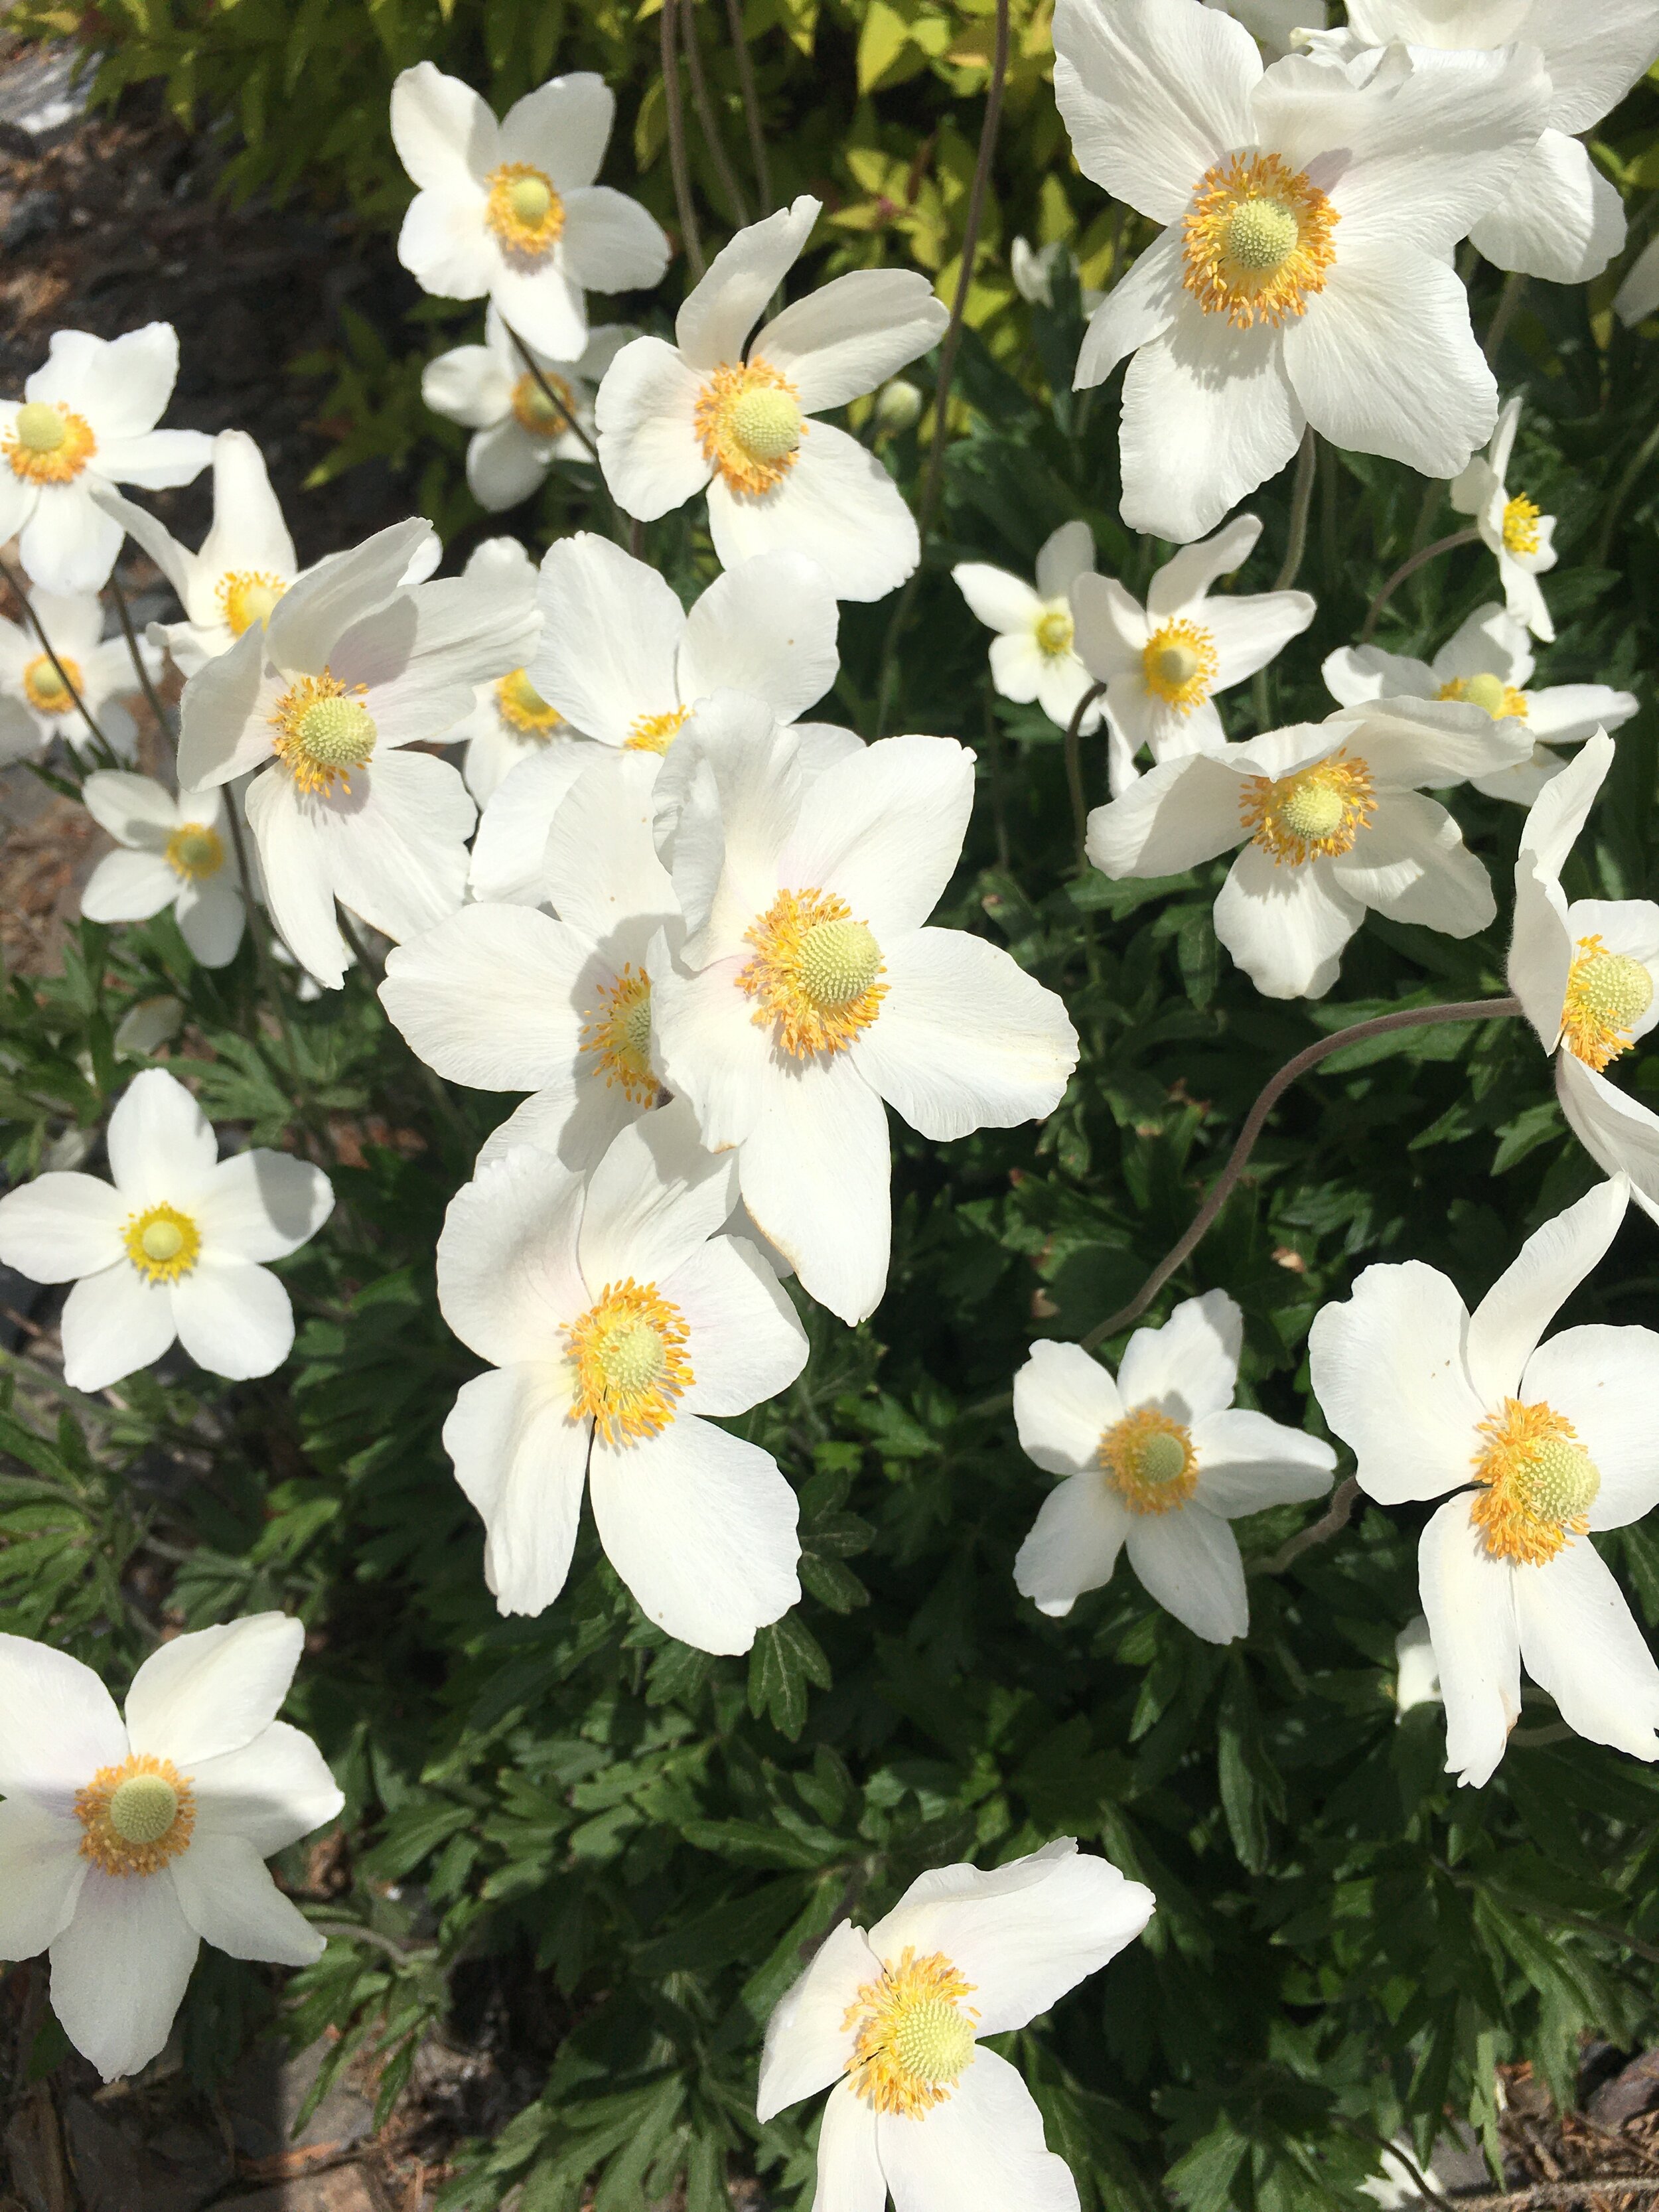 Anemone canadensis probably my favourite native flower.